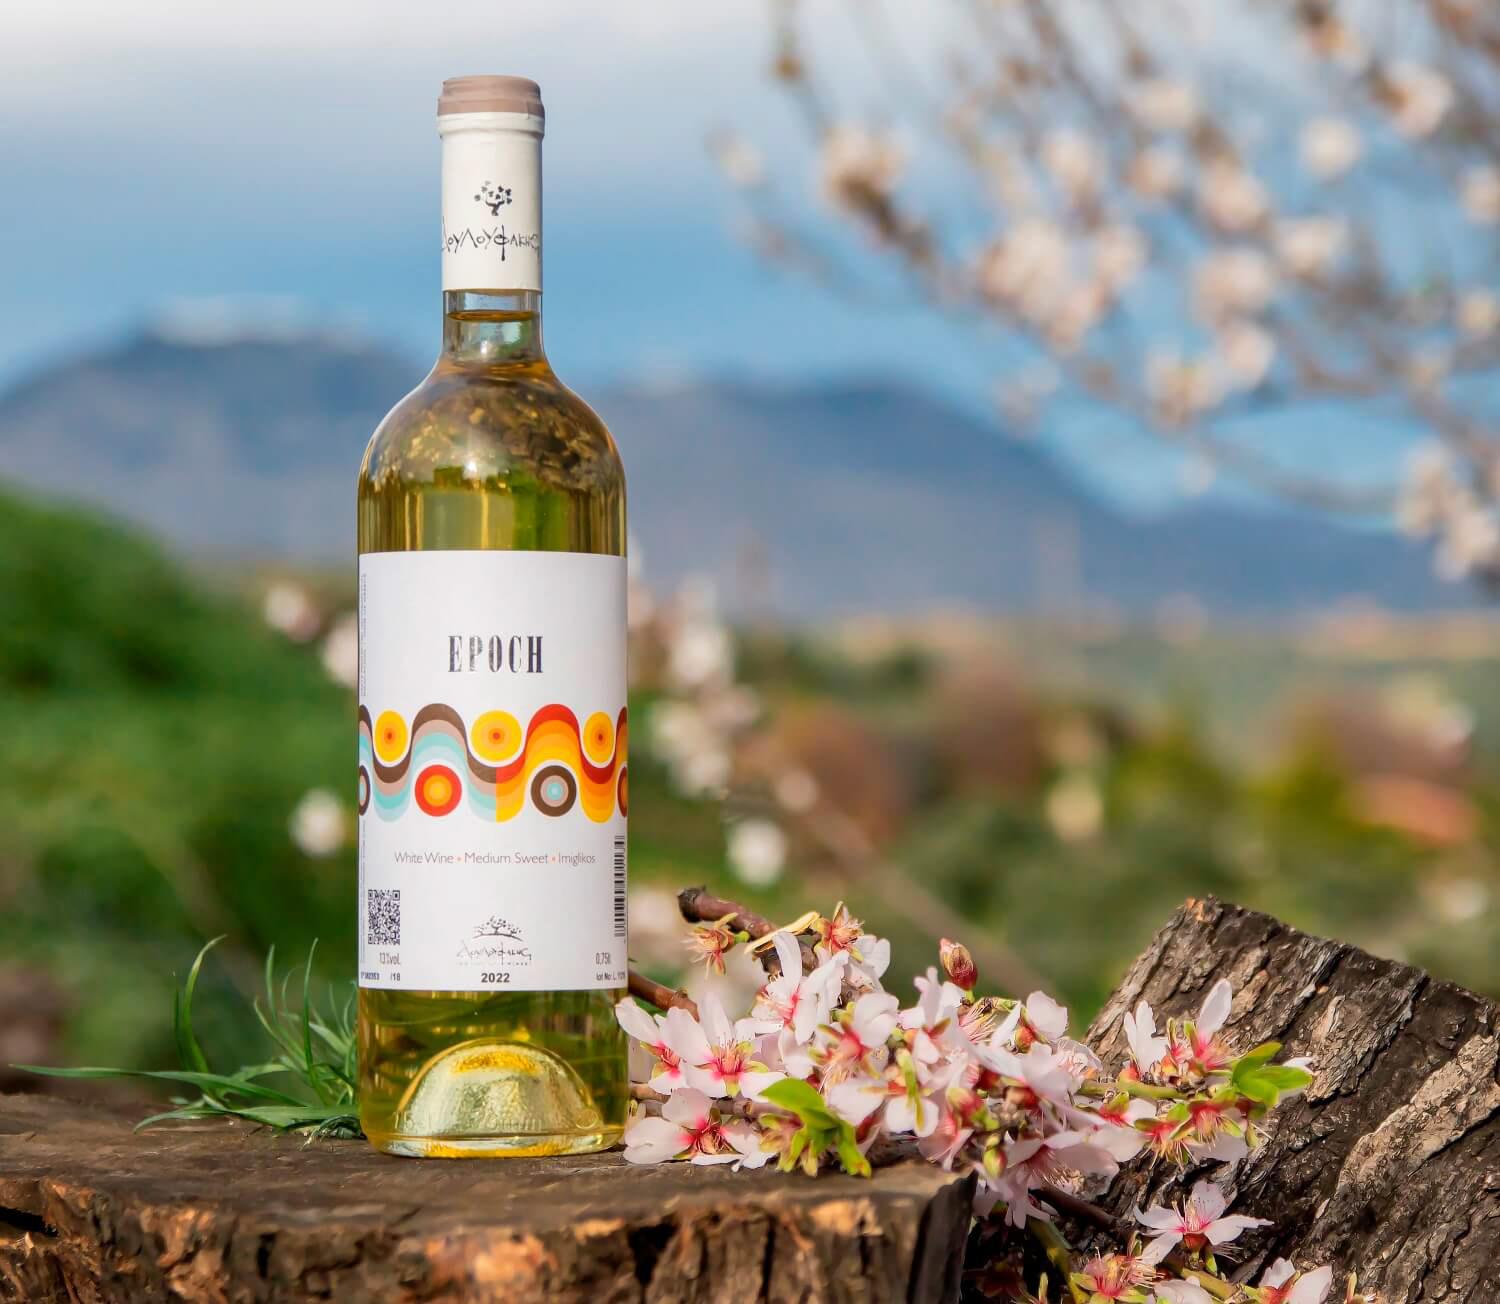 Douloufakis Muscat White of Spina grape wine